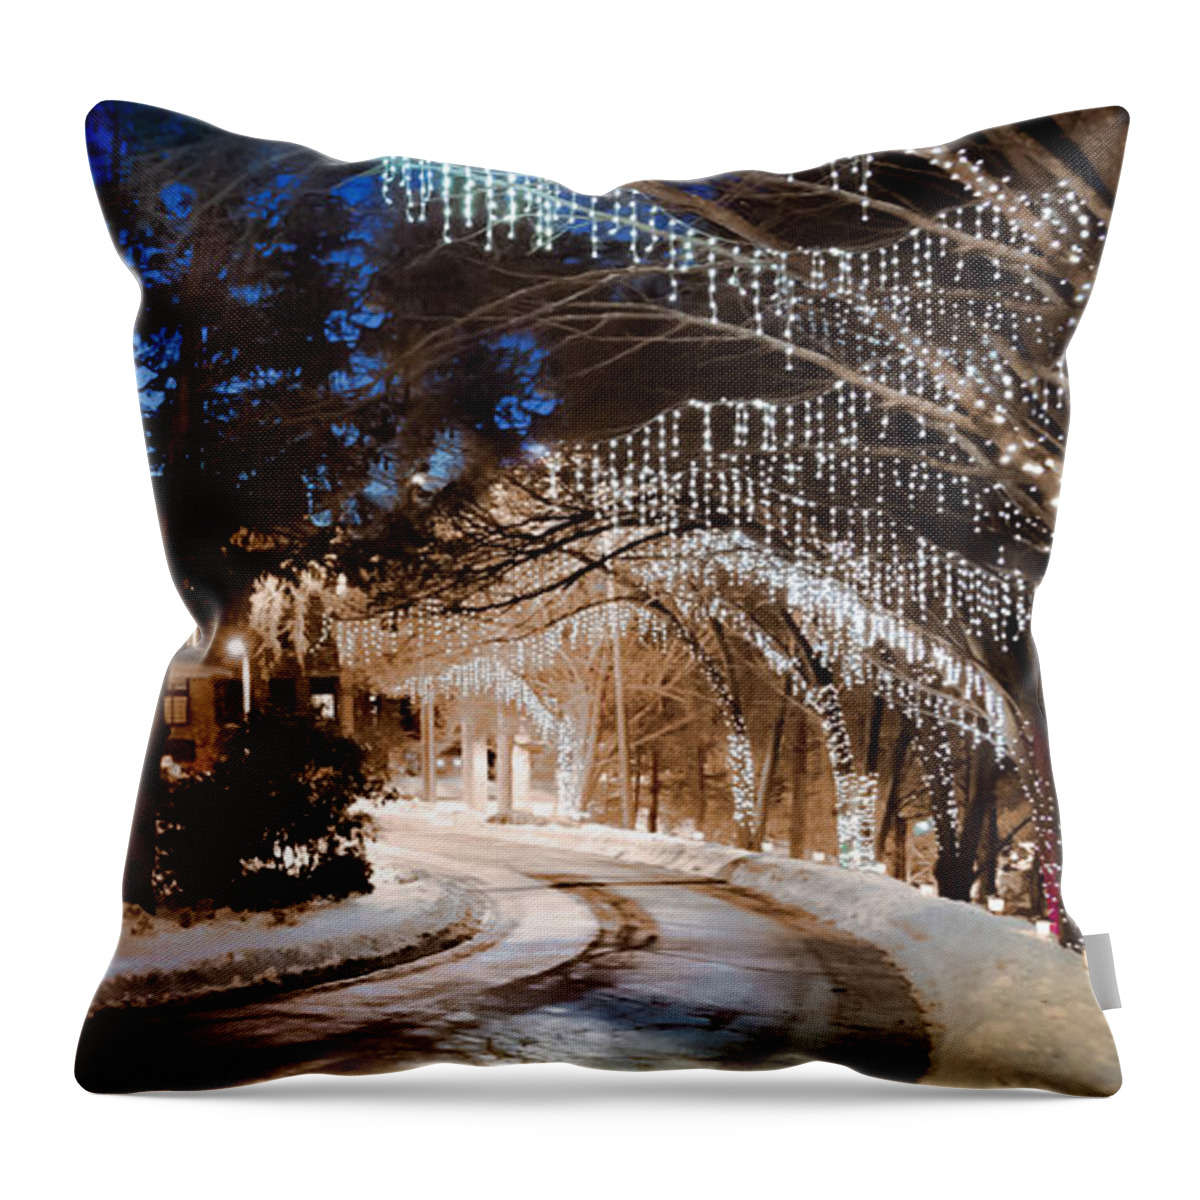 Grove Park Inn Throw Pillow featuring the photograph CELEBRATE the WINTER NIGHT by Karen Wiles